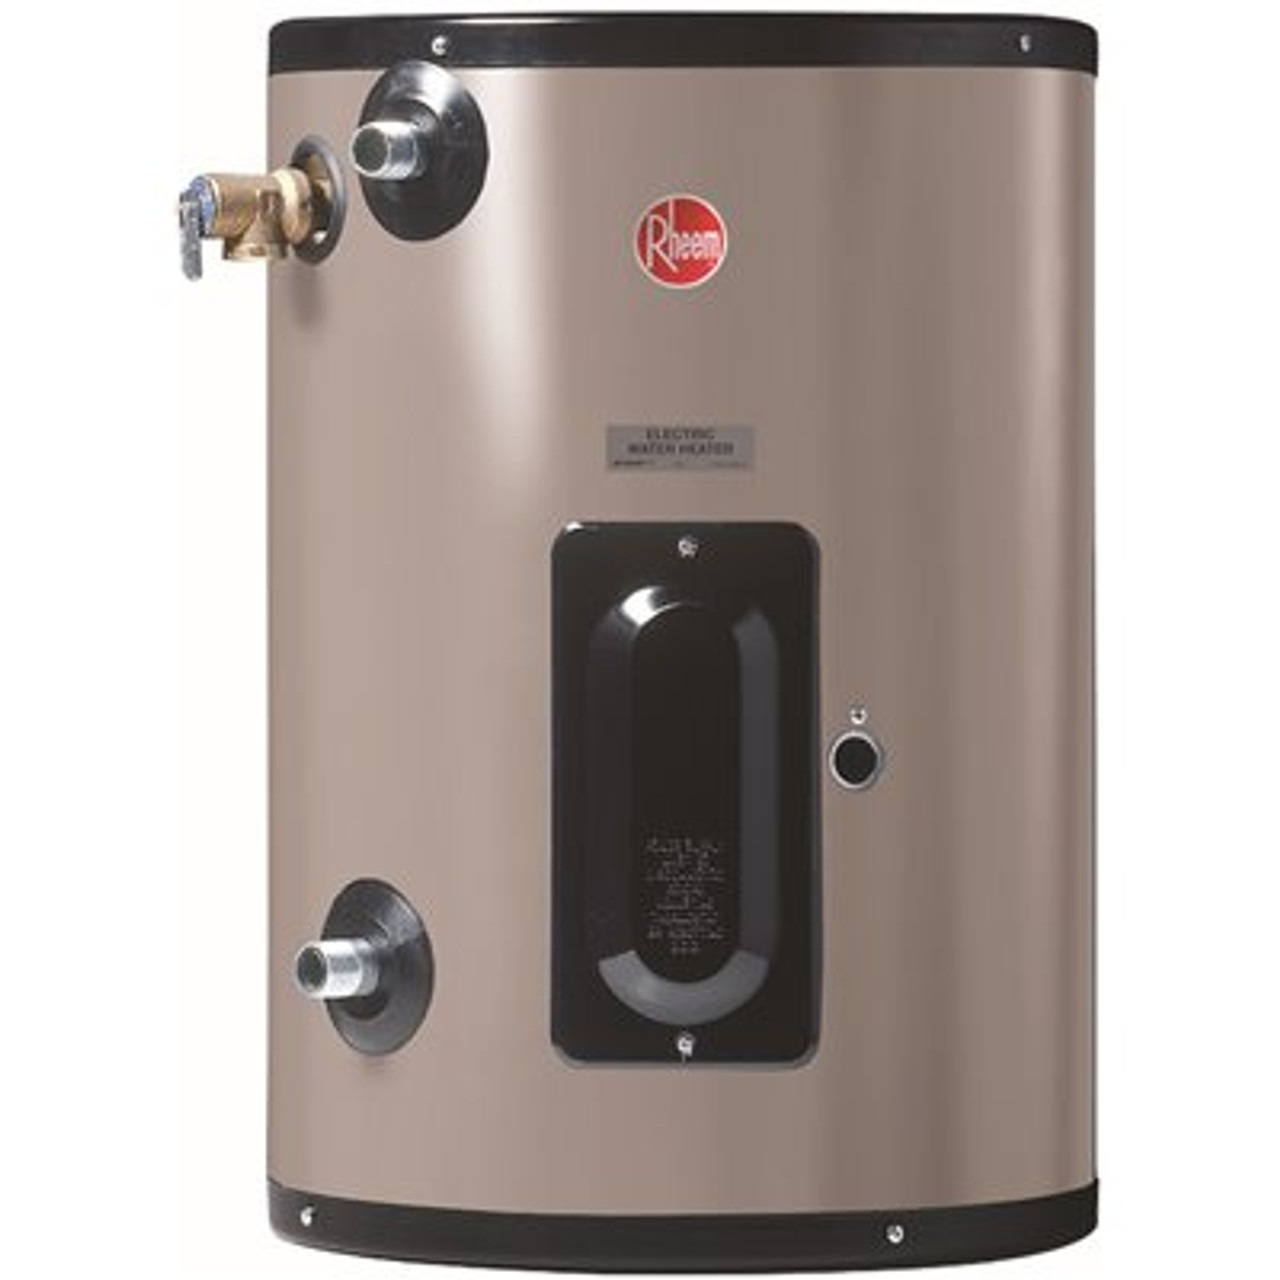 Rheem Commercial Point of Use 20 Gal. 277-Volt 3kw 1 Phase Electric Tank Water Heater